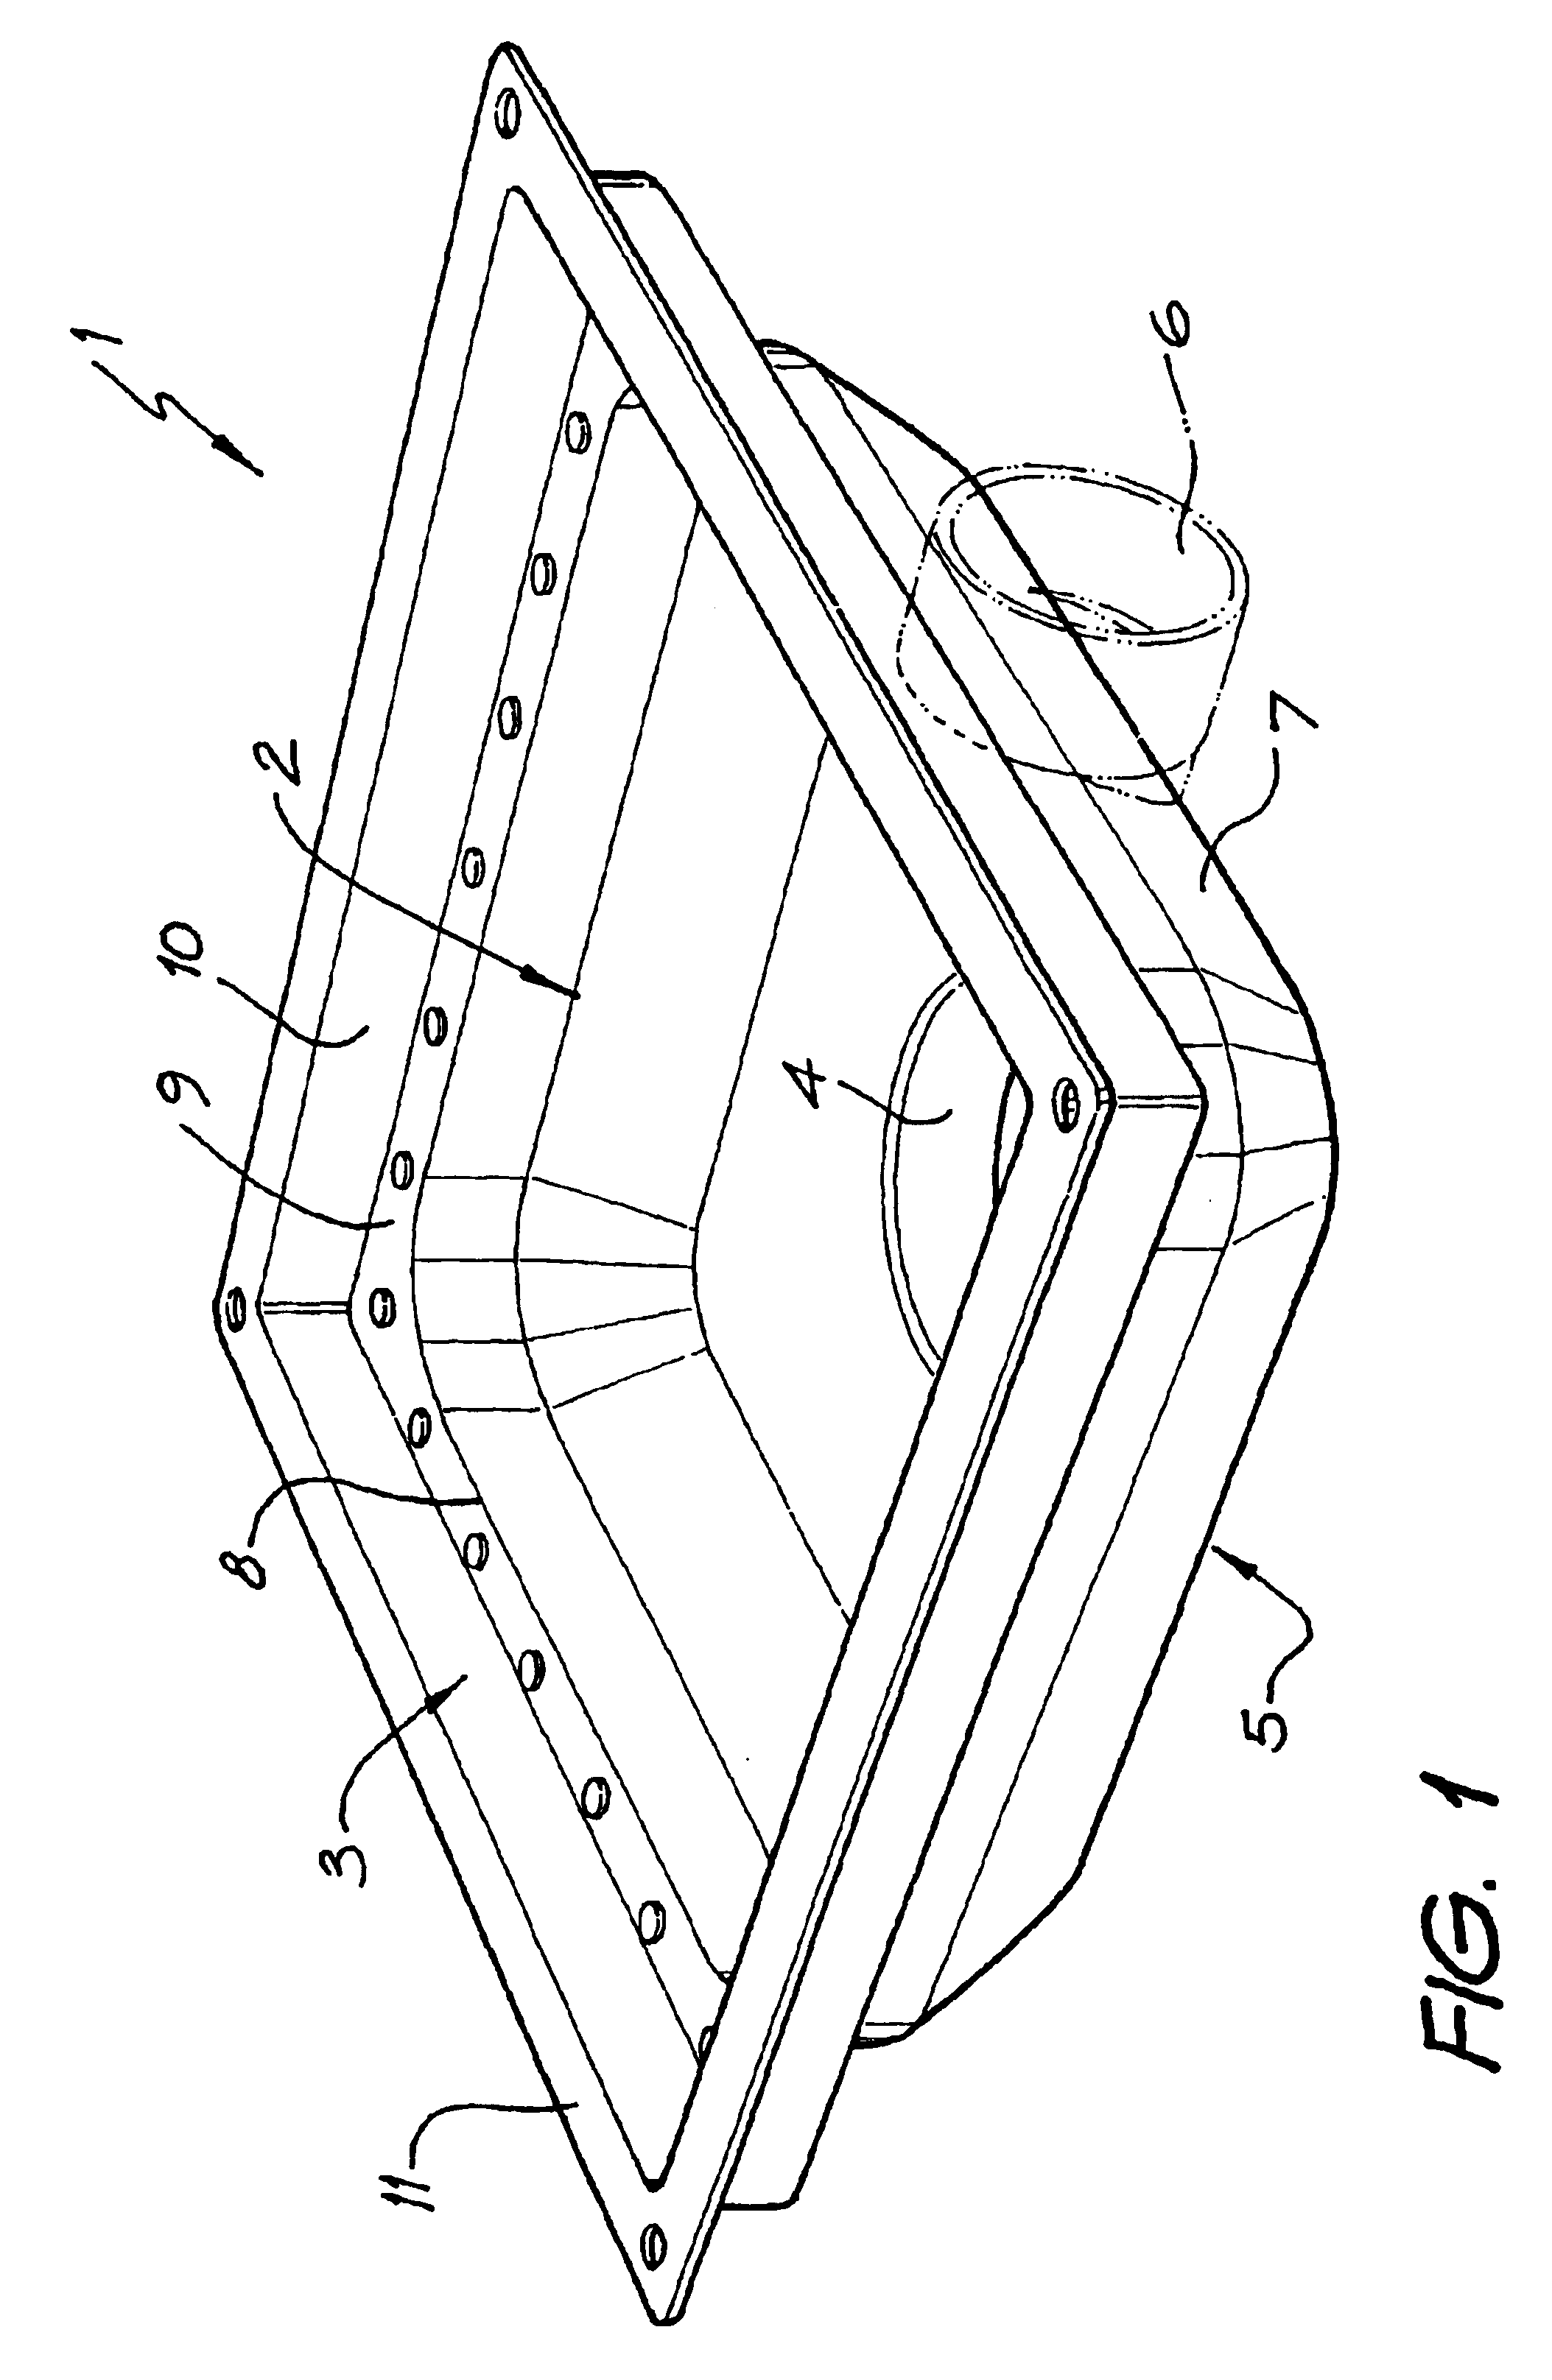 Waste assembly allowing adjustable fitment of a floor waste or appliance